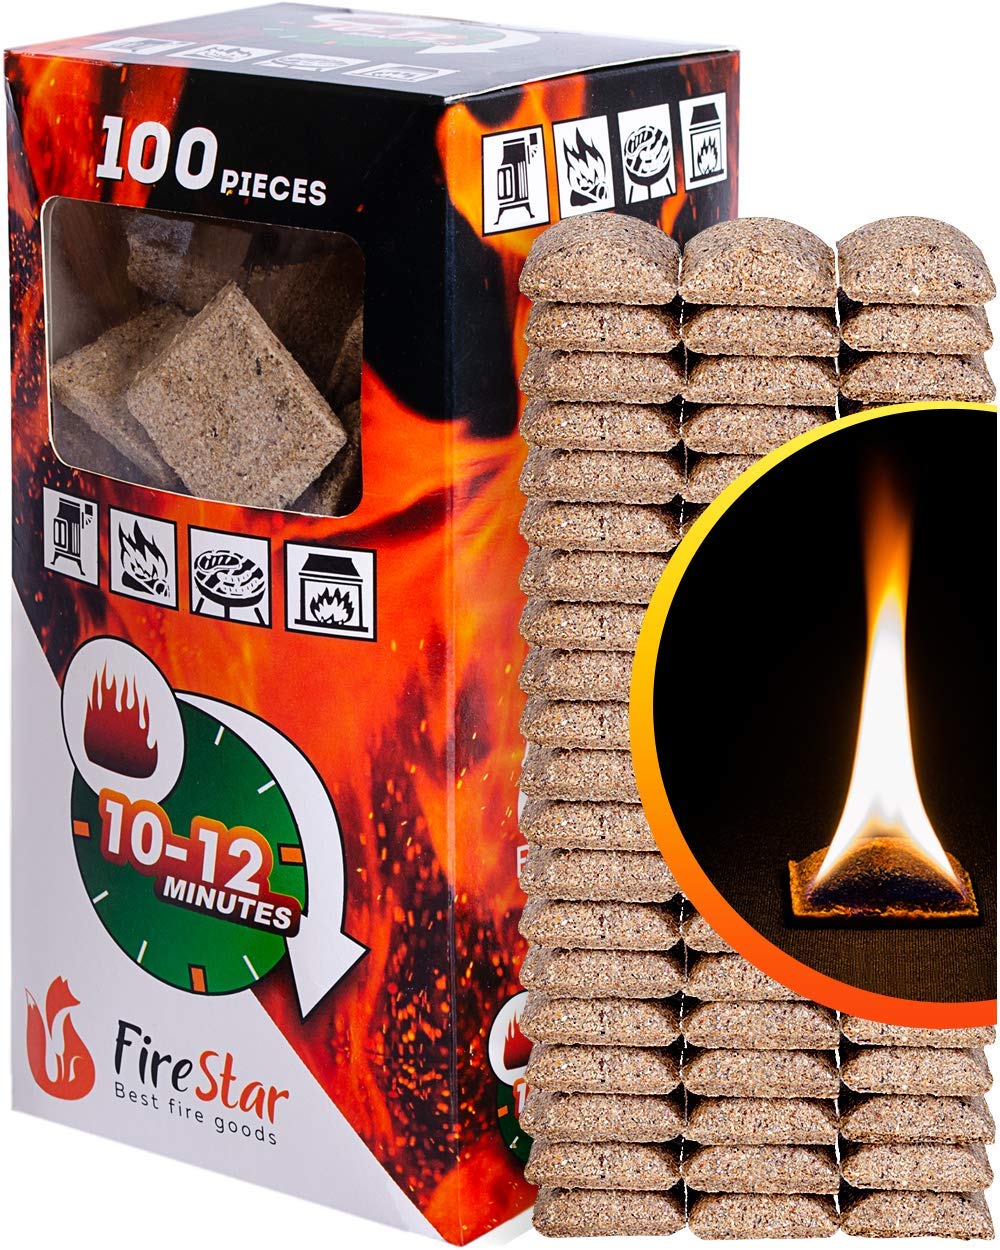 Wood Burning Fireplace with Gas Starter Best Of Fire Starter Squares 100pc Fire Starters for Fireplace Camping Fire Lighter Grill Charcoal Starter Cubes Firestarters for Campfires